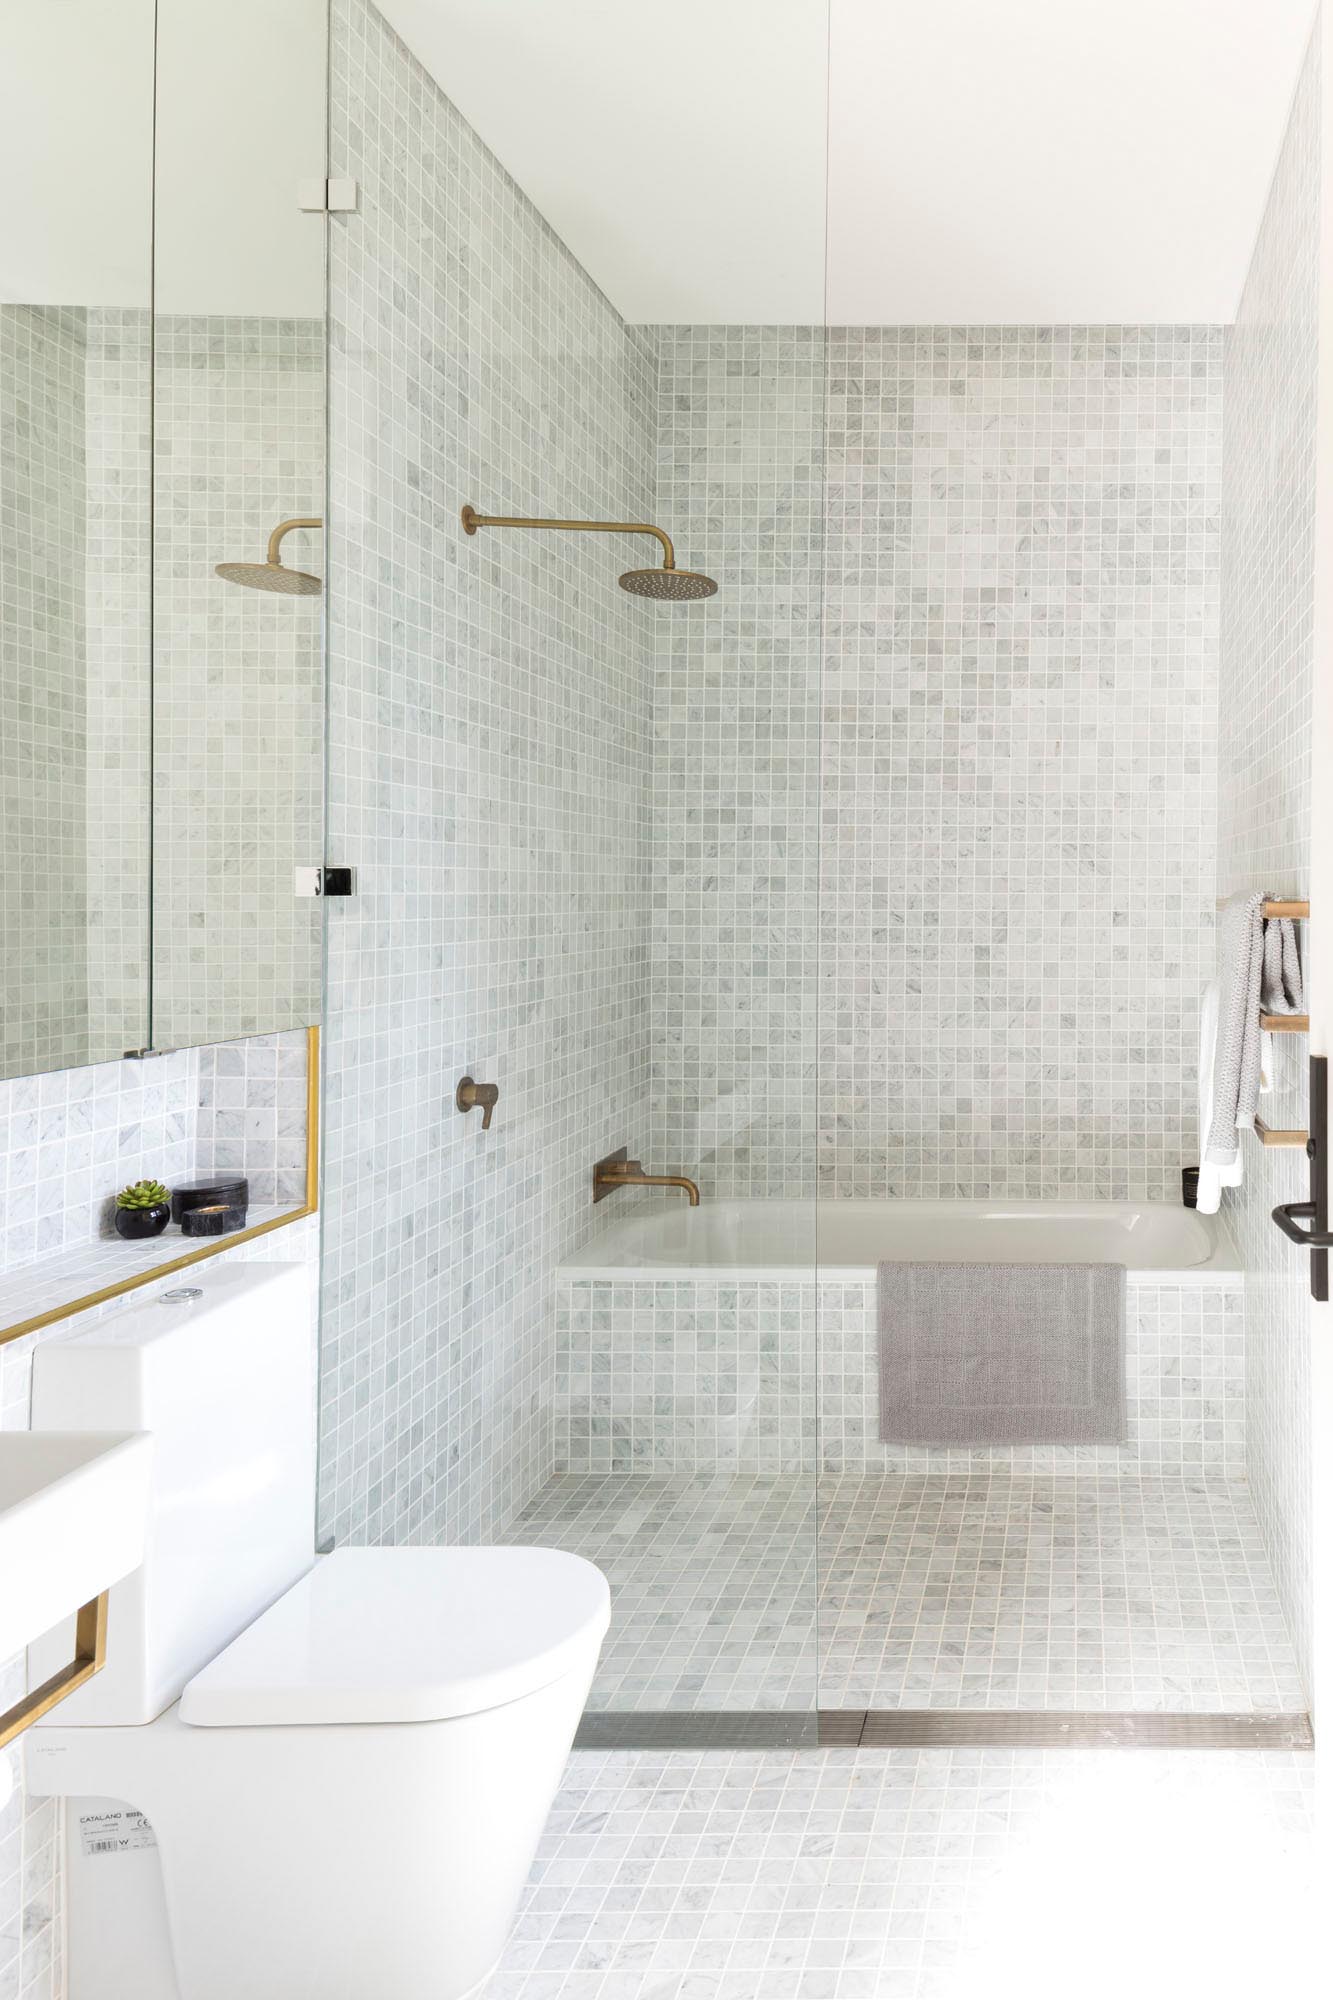 A modern bathroom with small square gray tiles and brass fixtures.